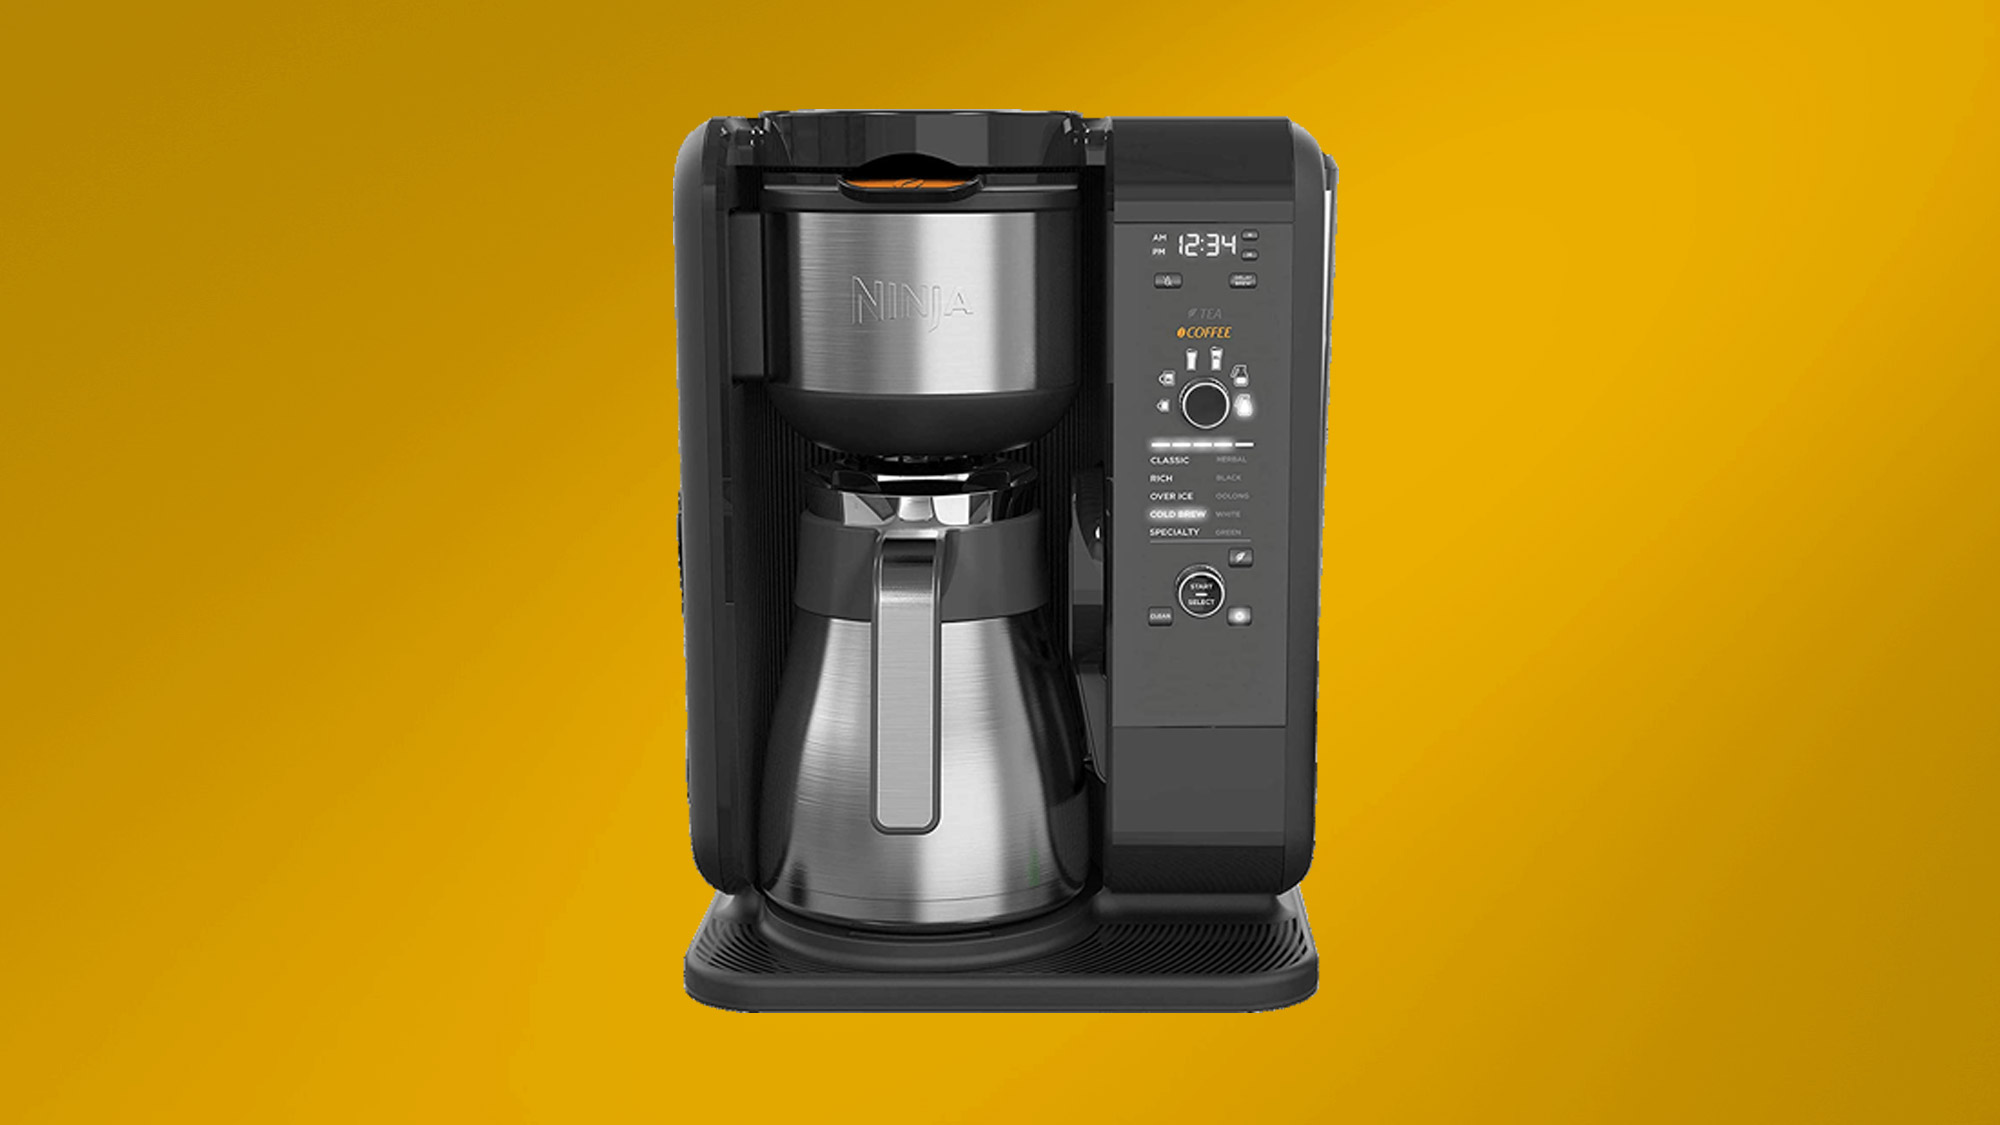 Ninja CP301 Coffee Maker Review - Hot/Cold Brew, Coffee, Tea, Frother 